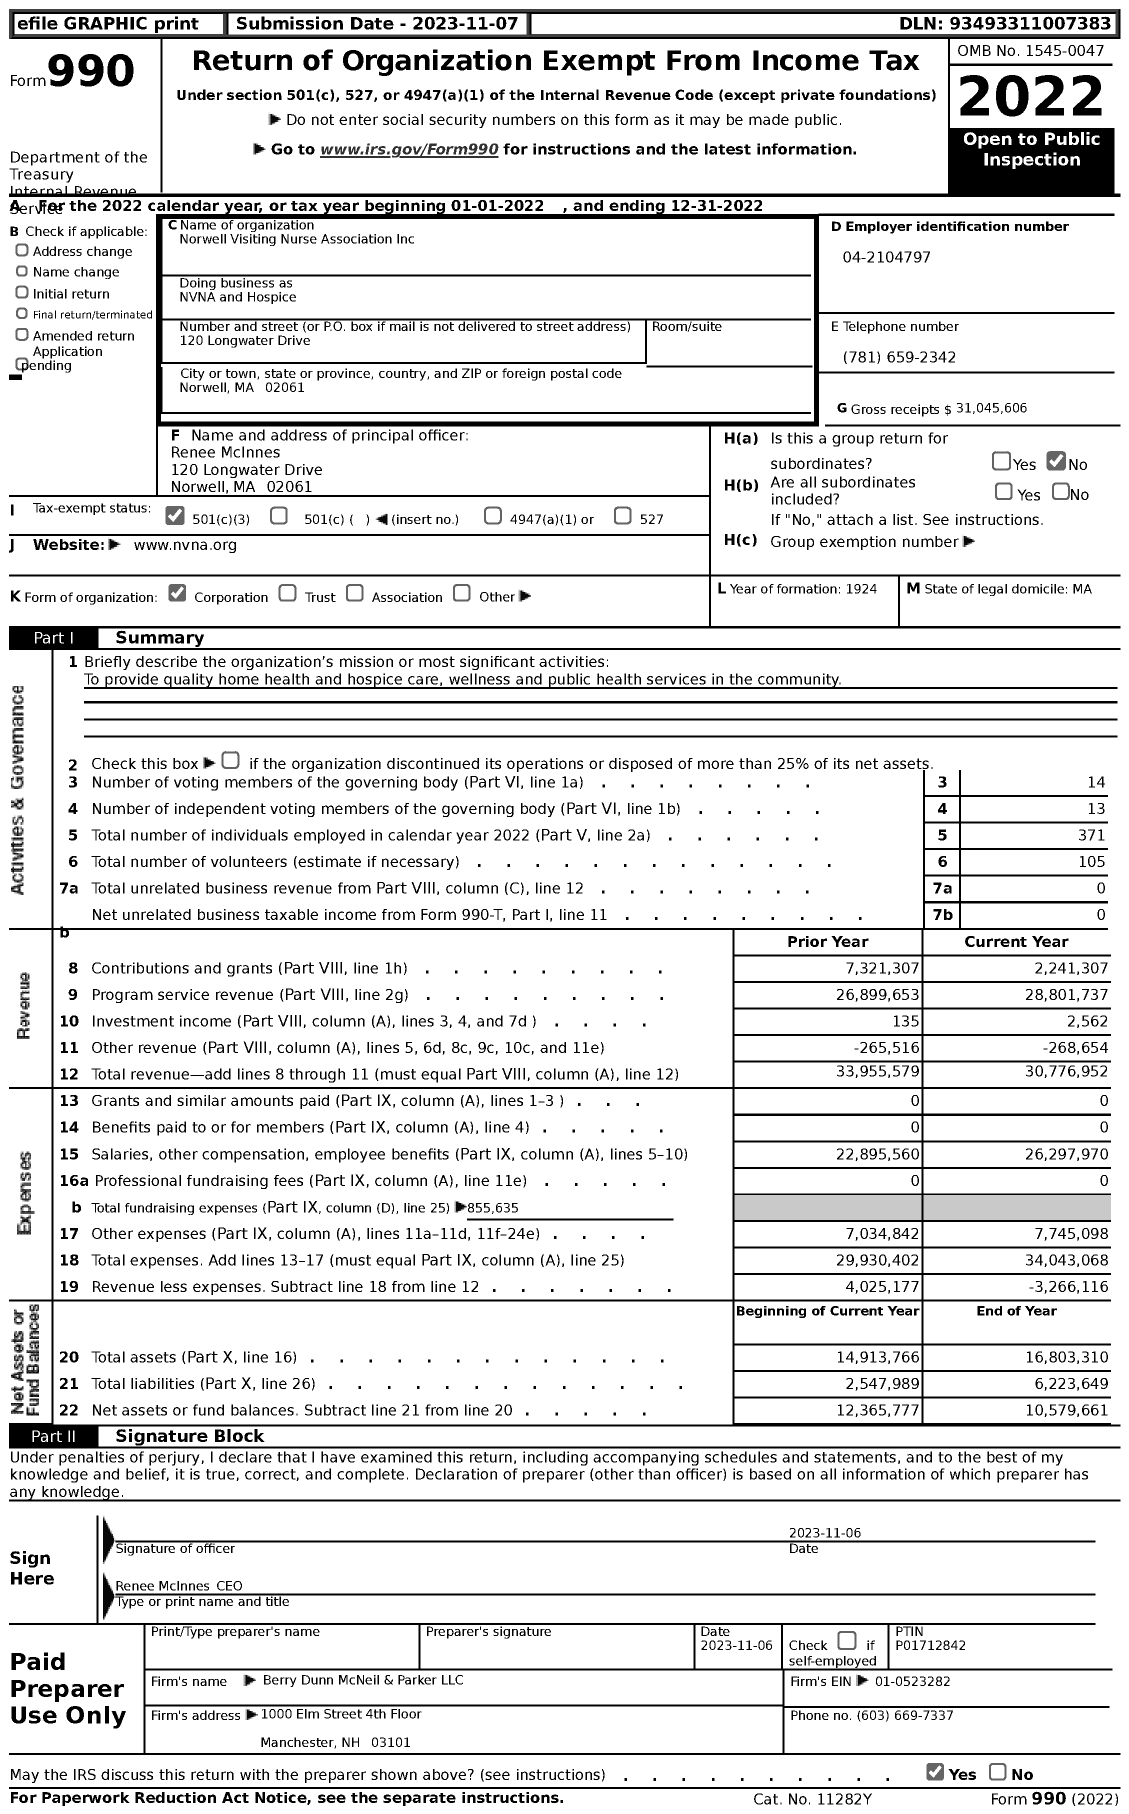 Image of first page of 2022 Form 990 for NVNA and Hospice (NVNA)